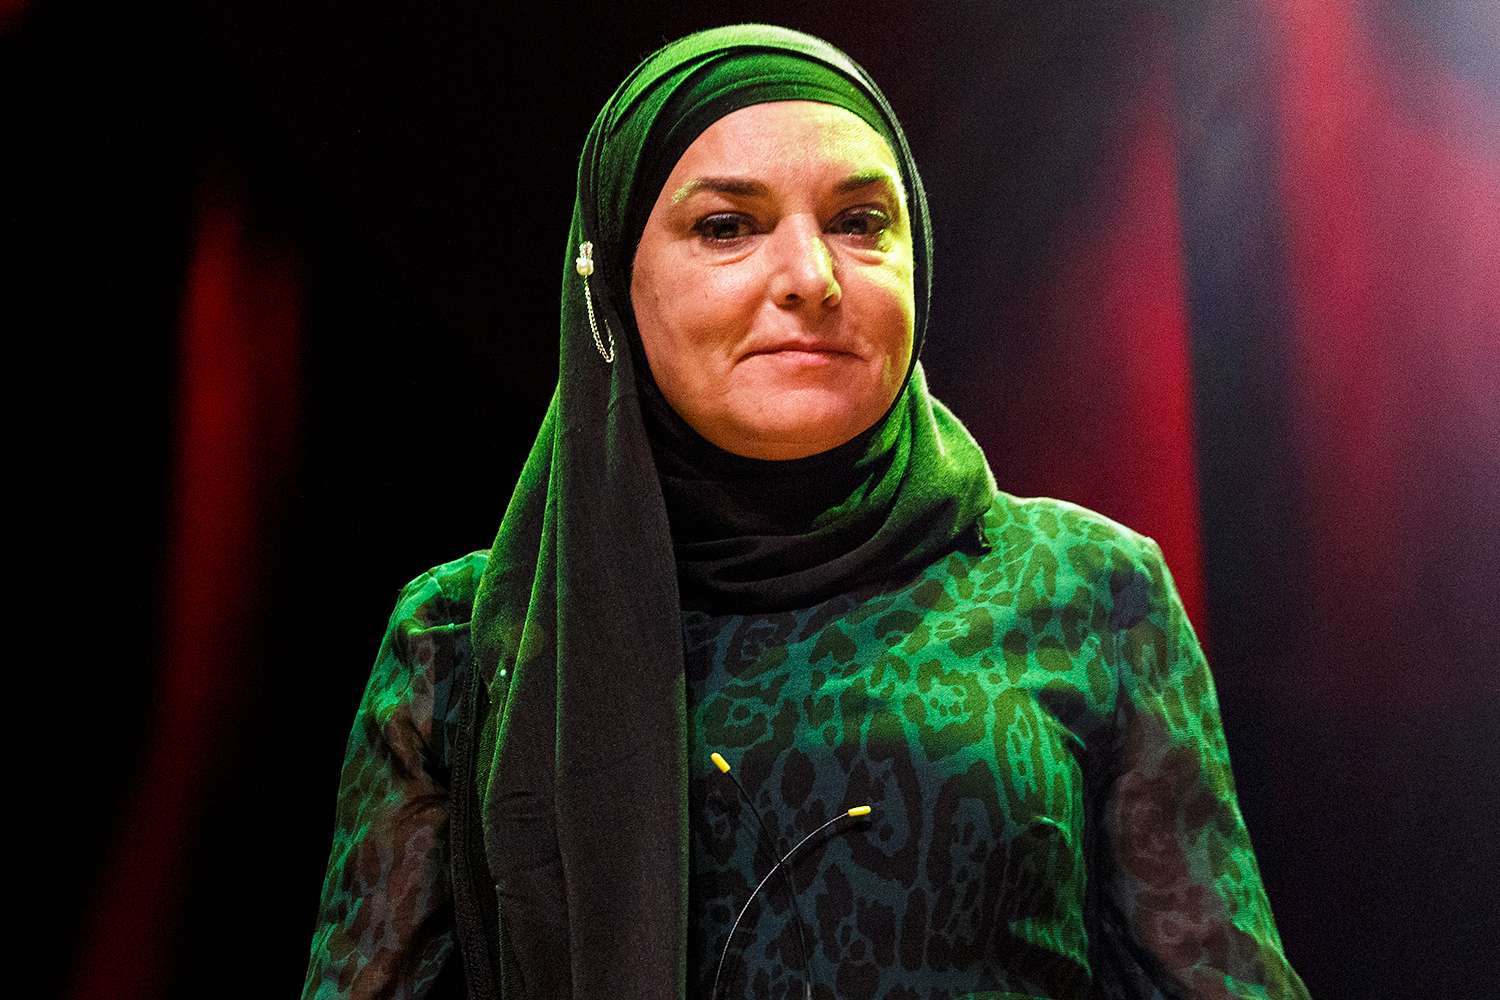 Sinead O'Connor performs on stage at Vogue Theatre on February 01, 2020 in Vancouver, Canada.